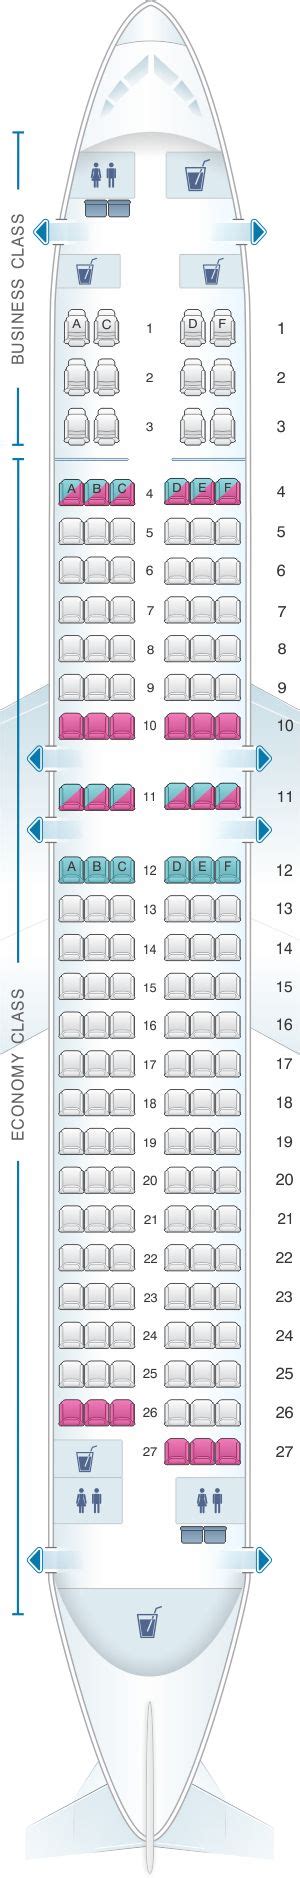 Seat Map Turkish Airlines Airbus A320 200 Vietnam Airlines Airline